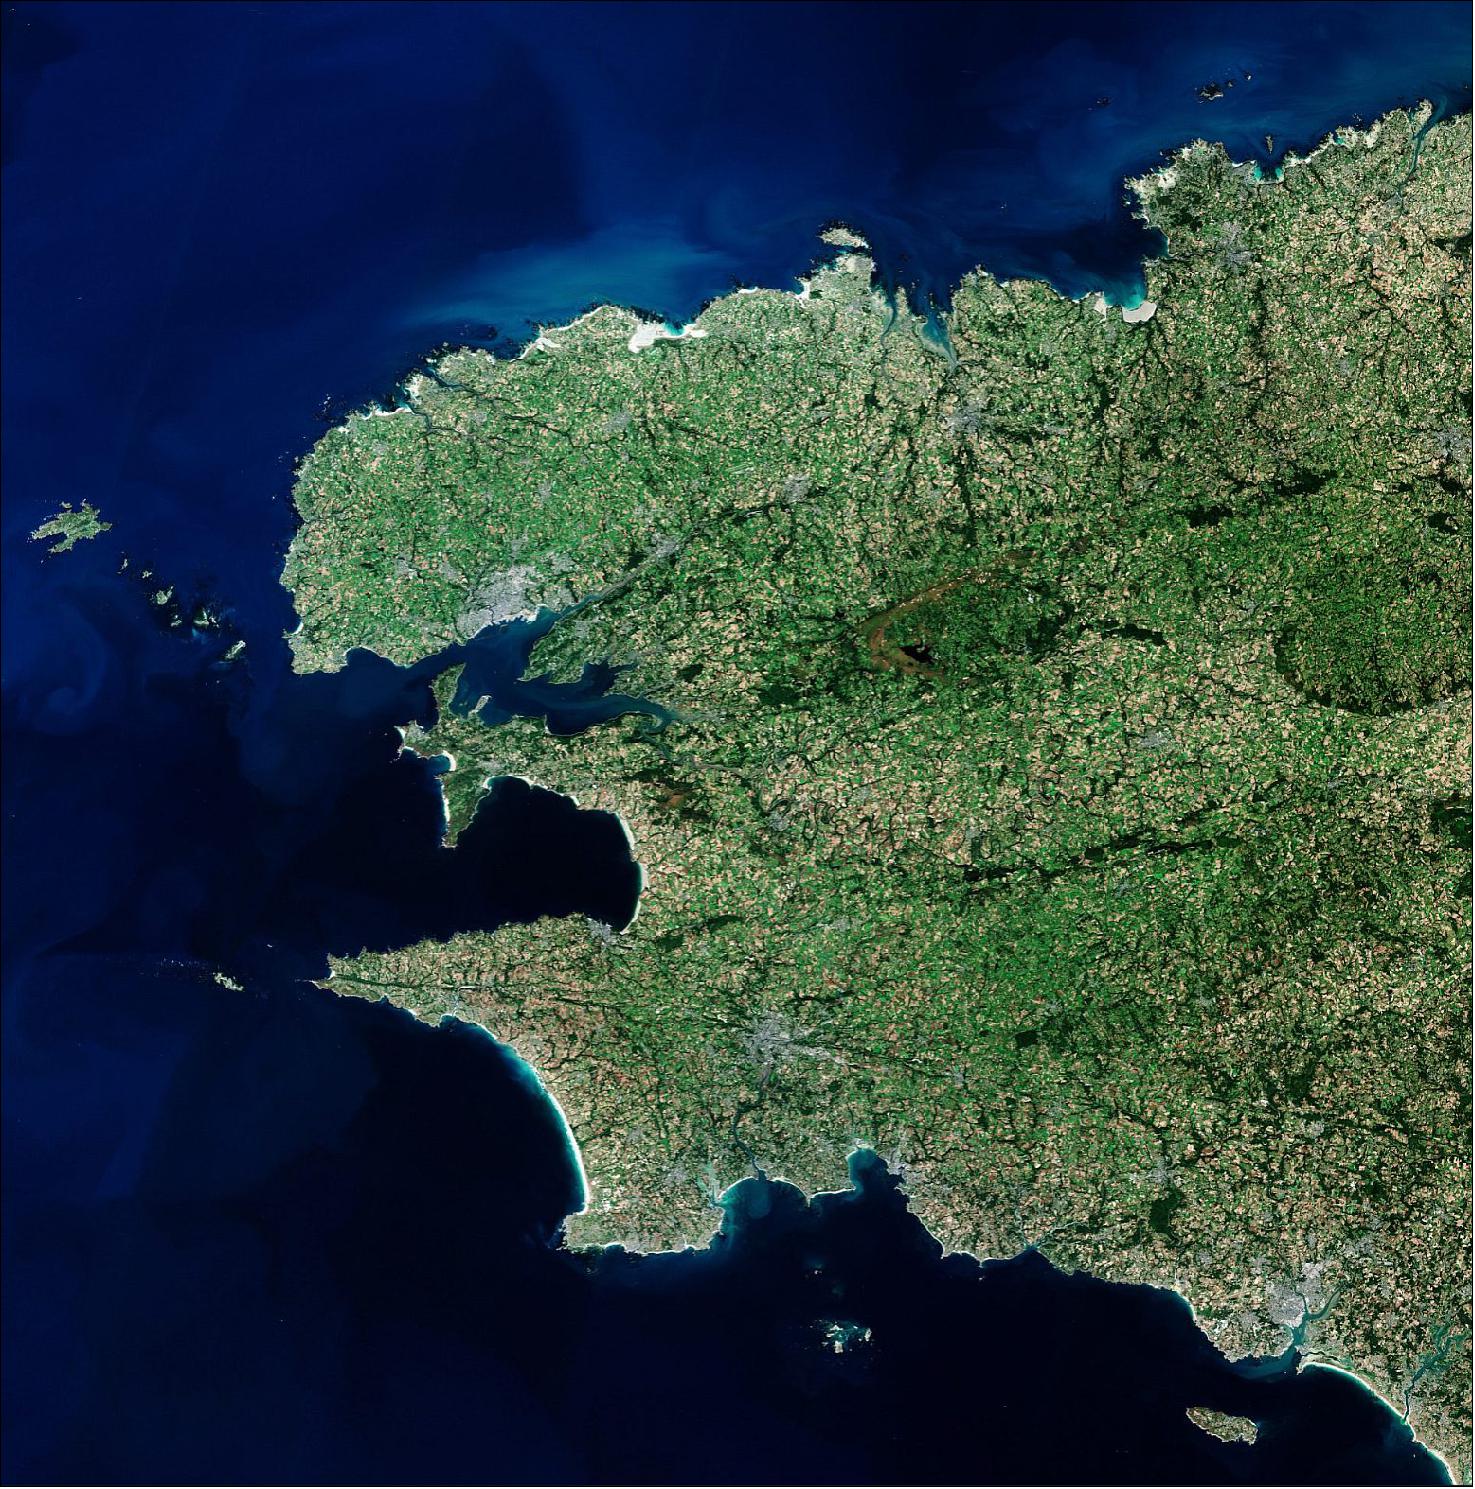 Figure 49: Fields blanket the French countryside and dominate this image captured on 27 September 2018 with Sentinel-2. Brittany is one of France’s leading vegetable growing regions known for its artichokes, cauliflowers, carrots and potatoes. In fact, France is one of the EU’s leading agricultural countries and is home to around a third of all agricultural land in the EU. This image is also featured on the Earth from Space video program (image credit: ESA, the image contains modified Copernicus Sentinel data (2018), processed by ESA, CC BY-SA 3.0 IGO)